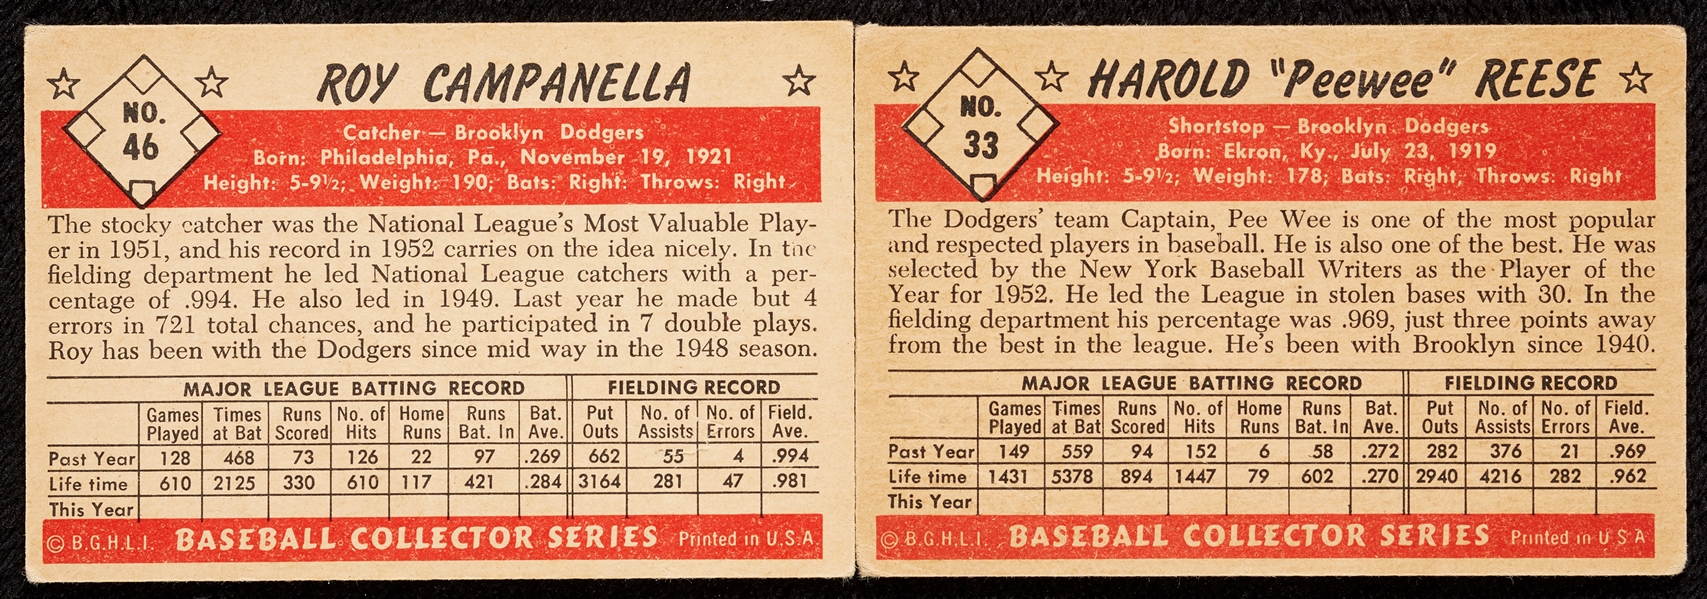 1953 Bowman Color Cards from Reese and Campanella (2)